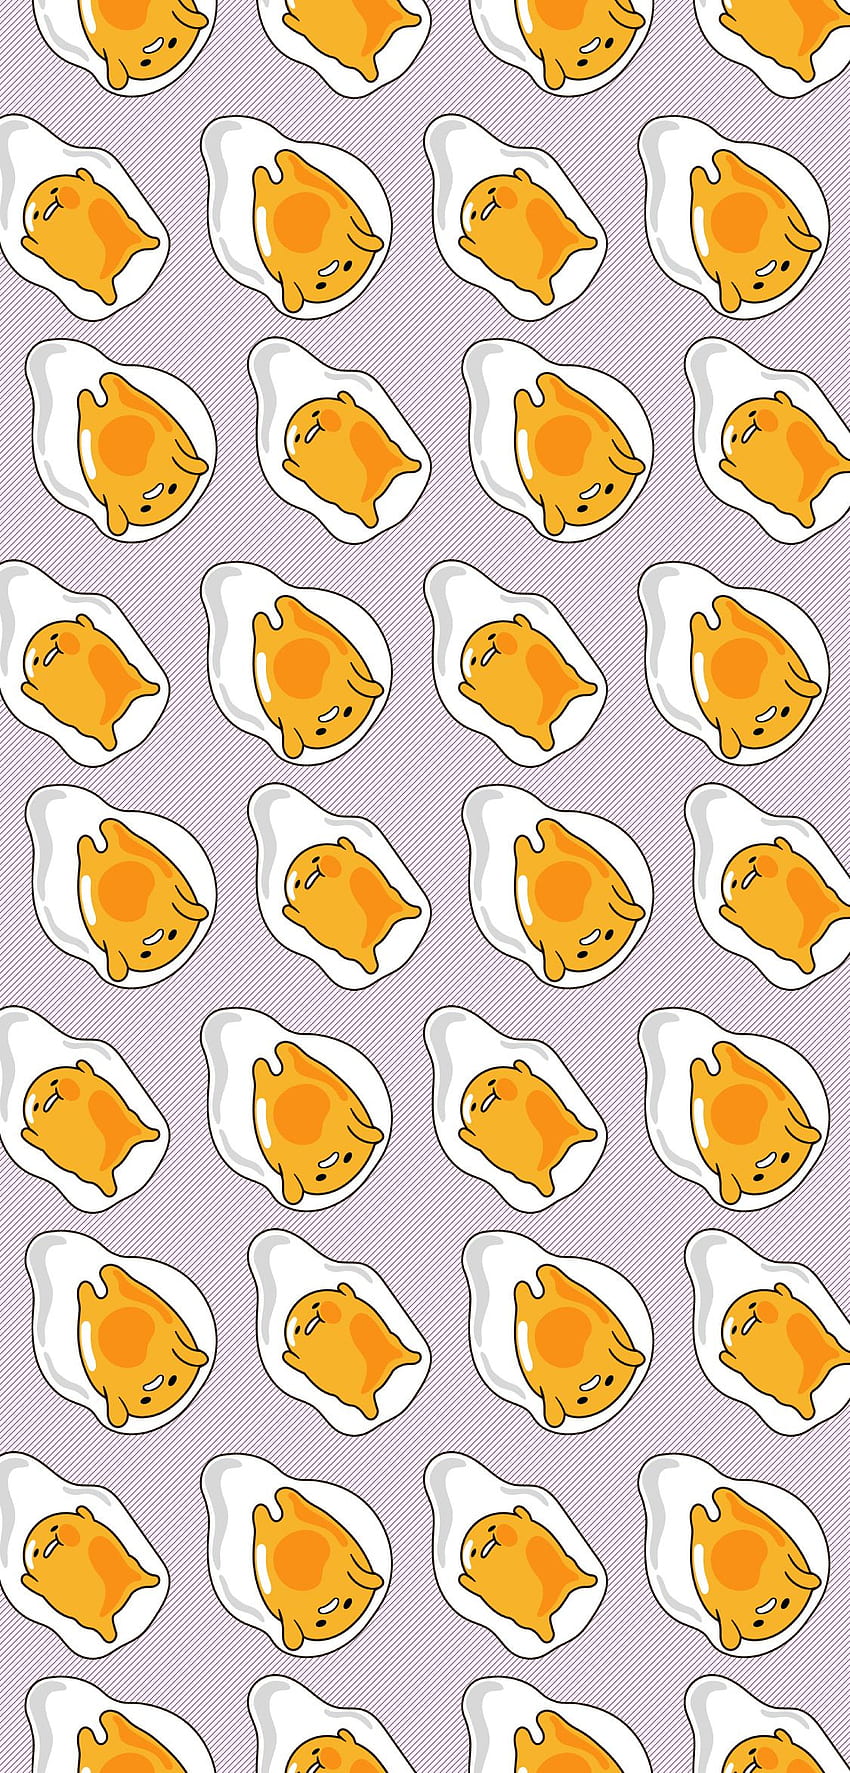 A pattern of eggs with little fish on them - Egg